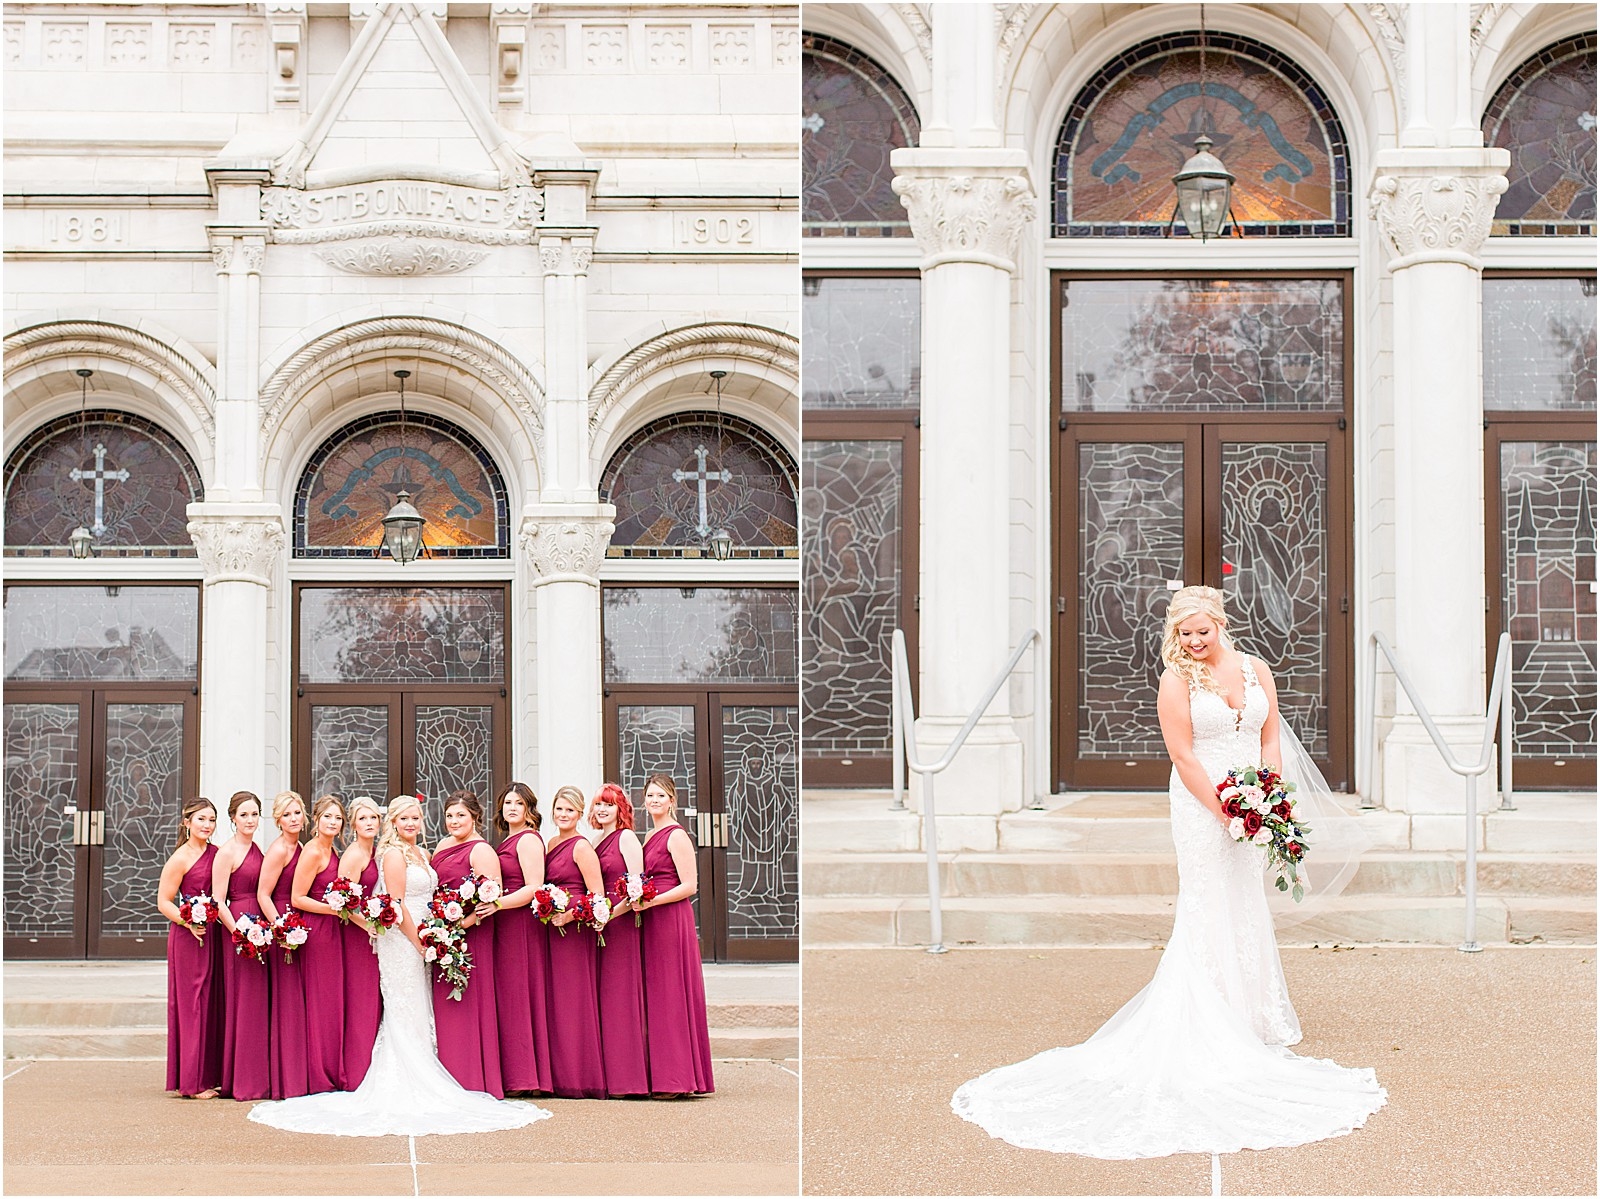 Haylee and Dillon's Evansville, Indiana wedding by Bret and Brandie Photography.0050.jpg